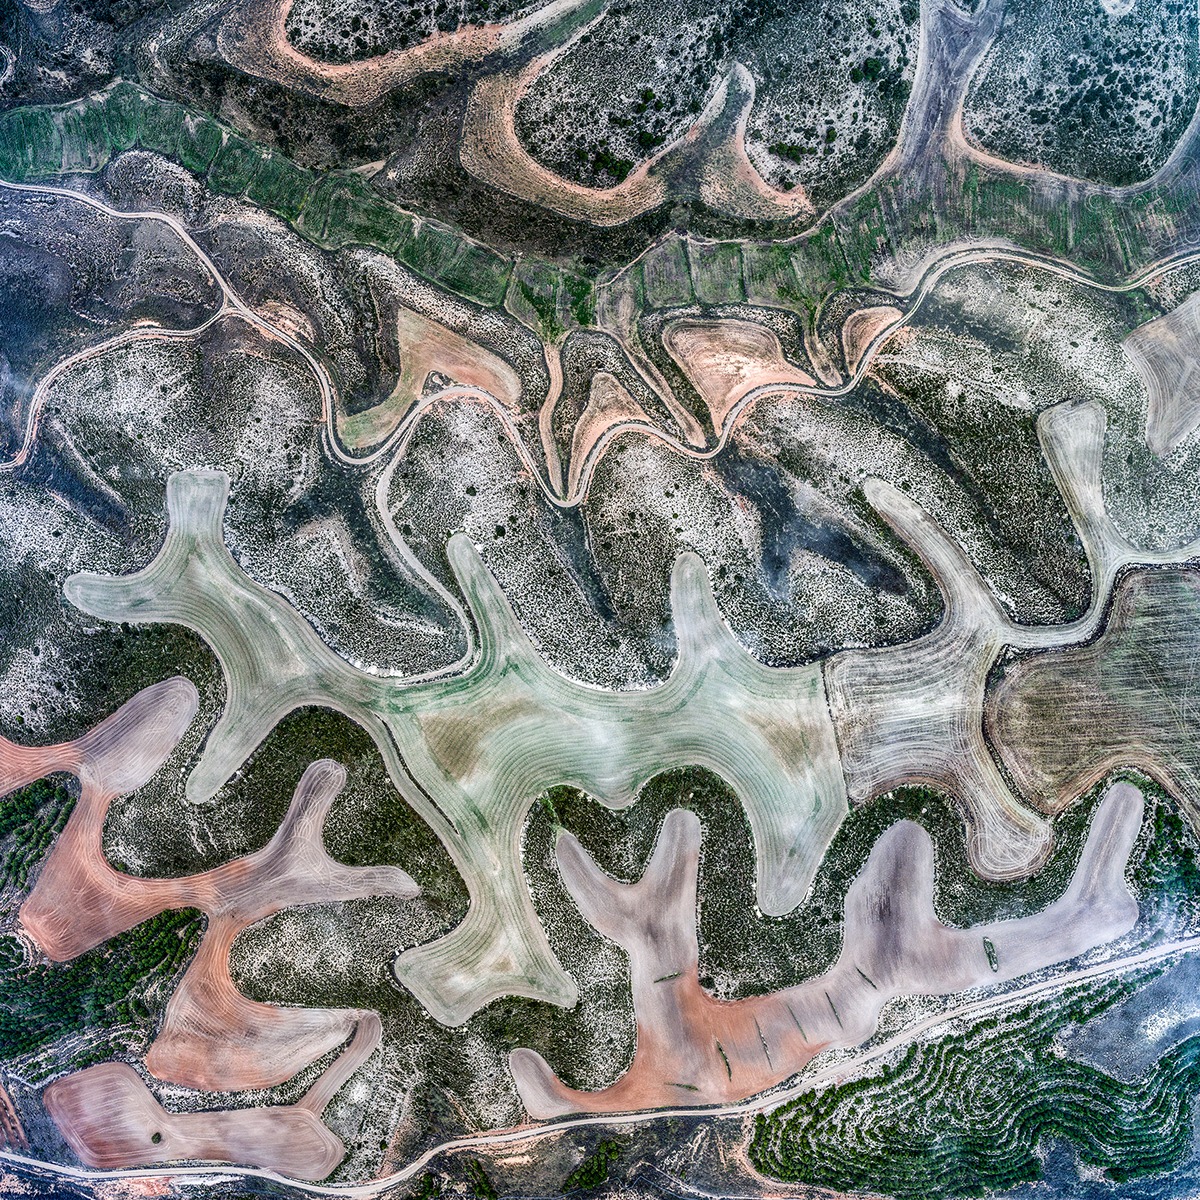 Peñalba Brumoso - Cultivated landscapes reveal layers of soil of different colors, deposited thousands of years ago by rivers in the Ebro catchment area, and reveal the amorphous features of the terrain, photographed in foggy conditions.
Visible width: 803 m